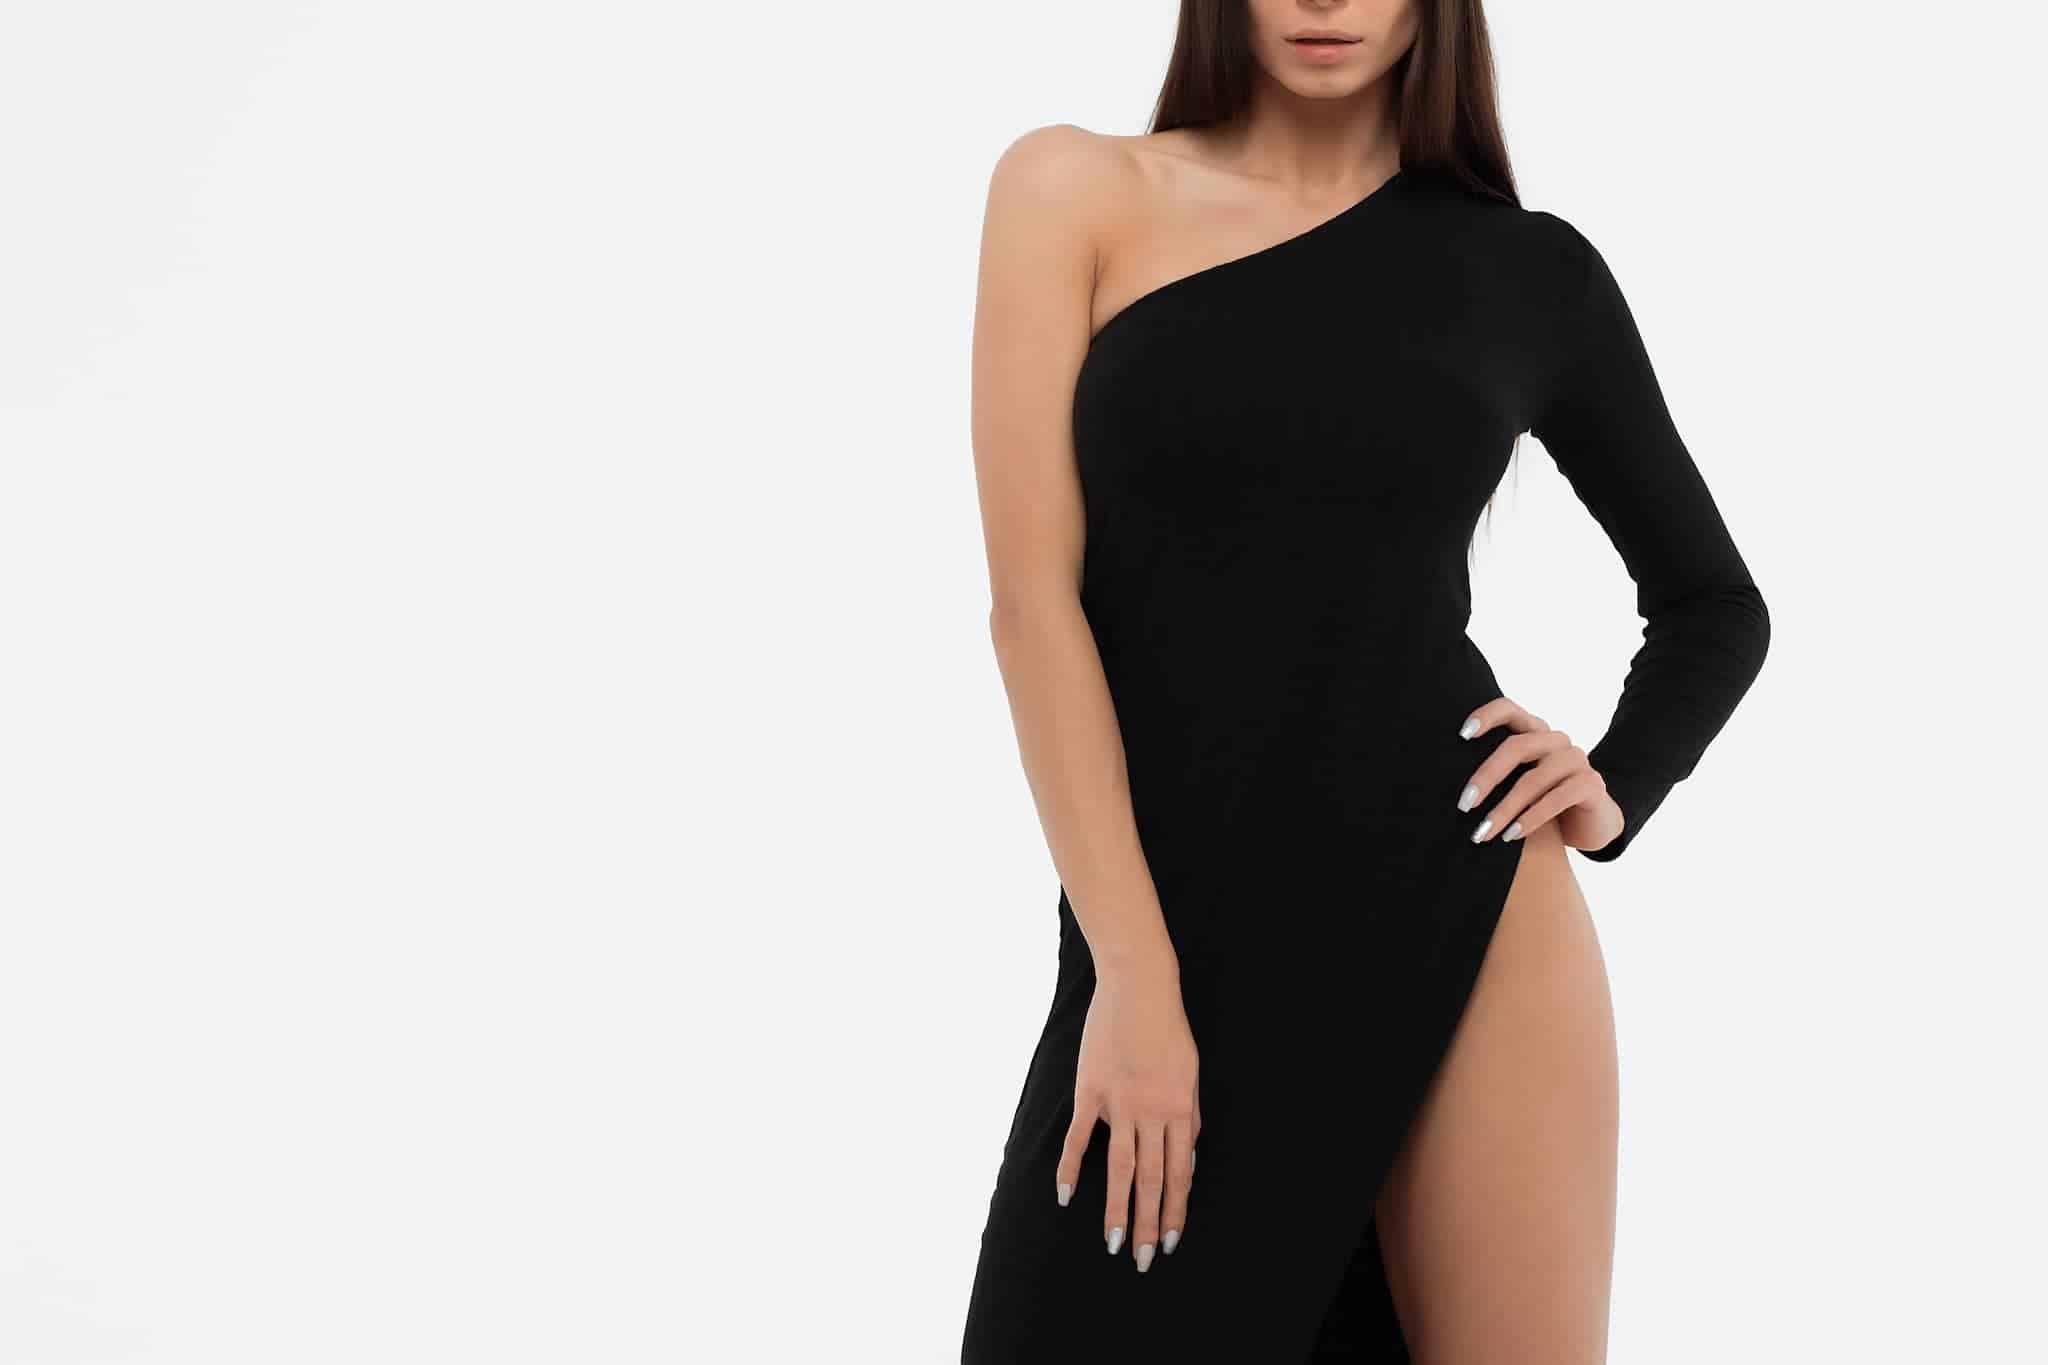 What is a Bodycon Dress and How to Wear Them The Right Way?